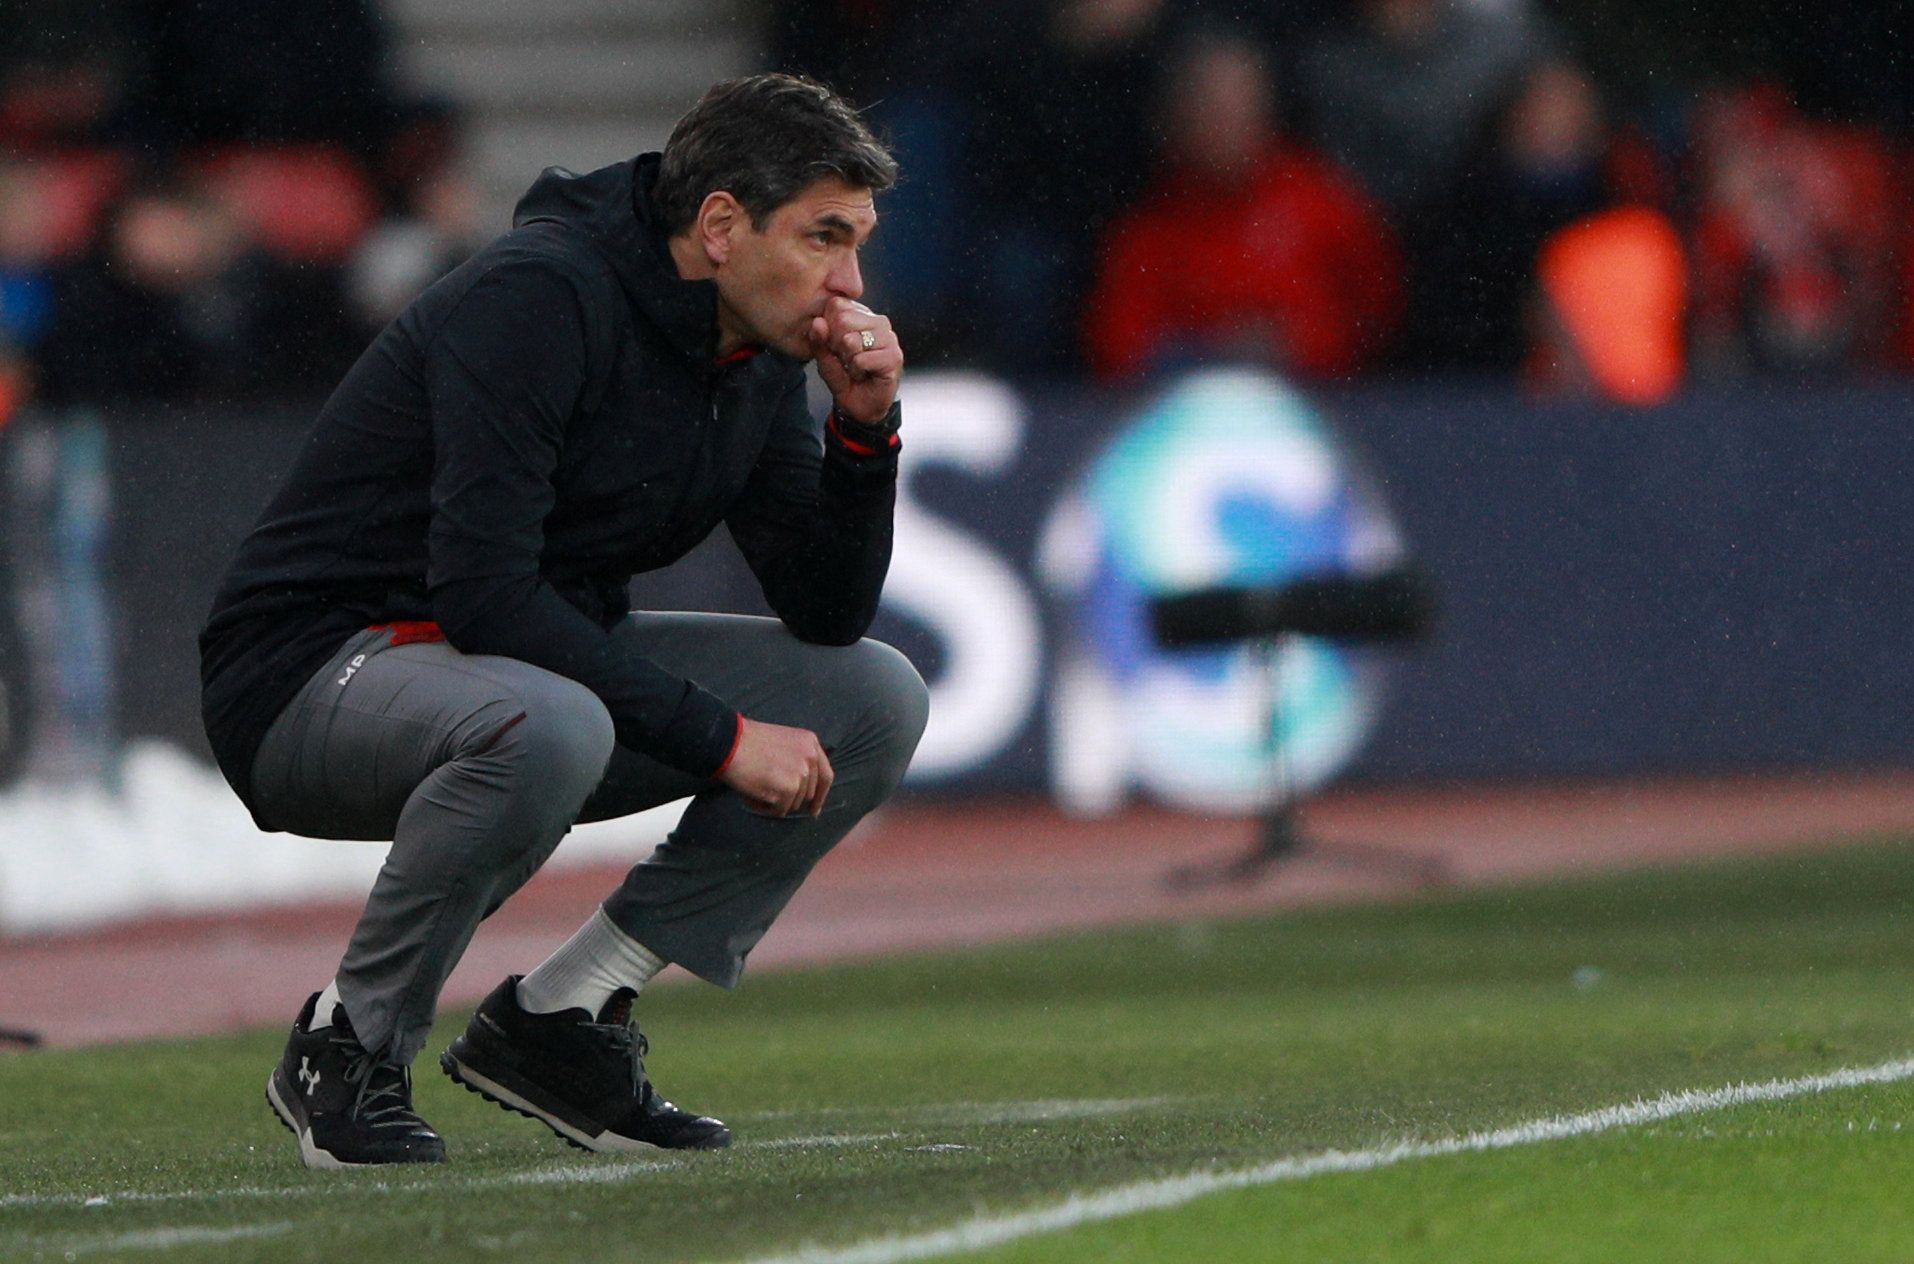 Soccer Football - Premier League - Southampton vs Stoke City - St Mary's Stadium, Southampton, Britain - March 3, 2018   Southampton manager Mauricio Pellegrino looks on   REUTERS/Ian Walton    EDITORIAL USE ONLY. No use with unauthorized audio, video, data, fixture lists, club/league logos or "live" services. Online in-match use limited to 75 images, no video emulation. No use in betting, games or single club/league/player publications.  Please contact your account representative for further de